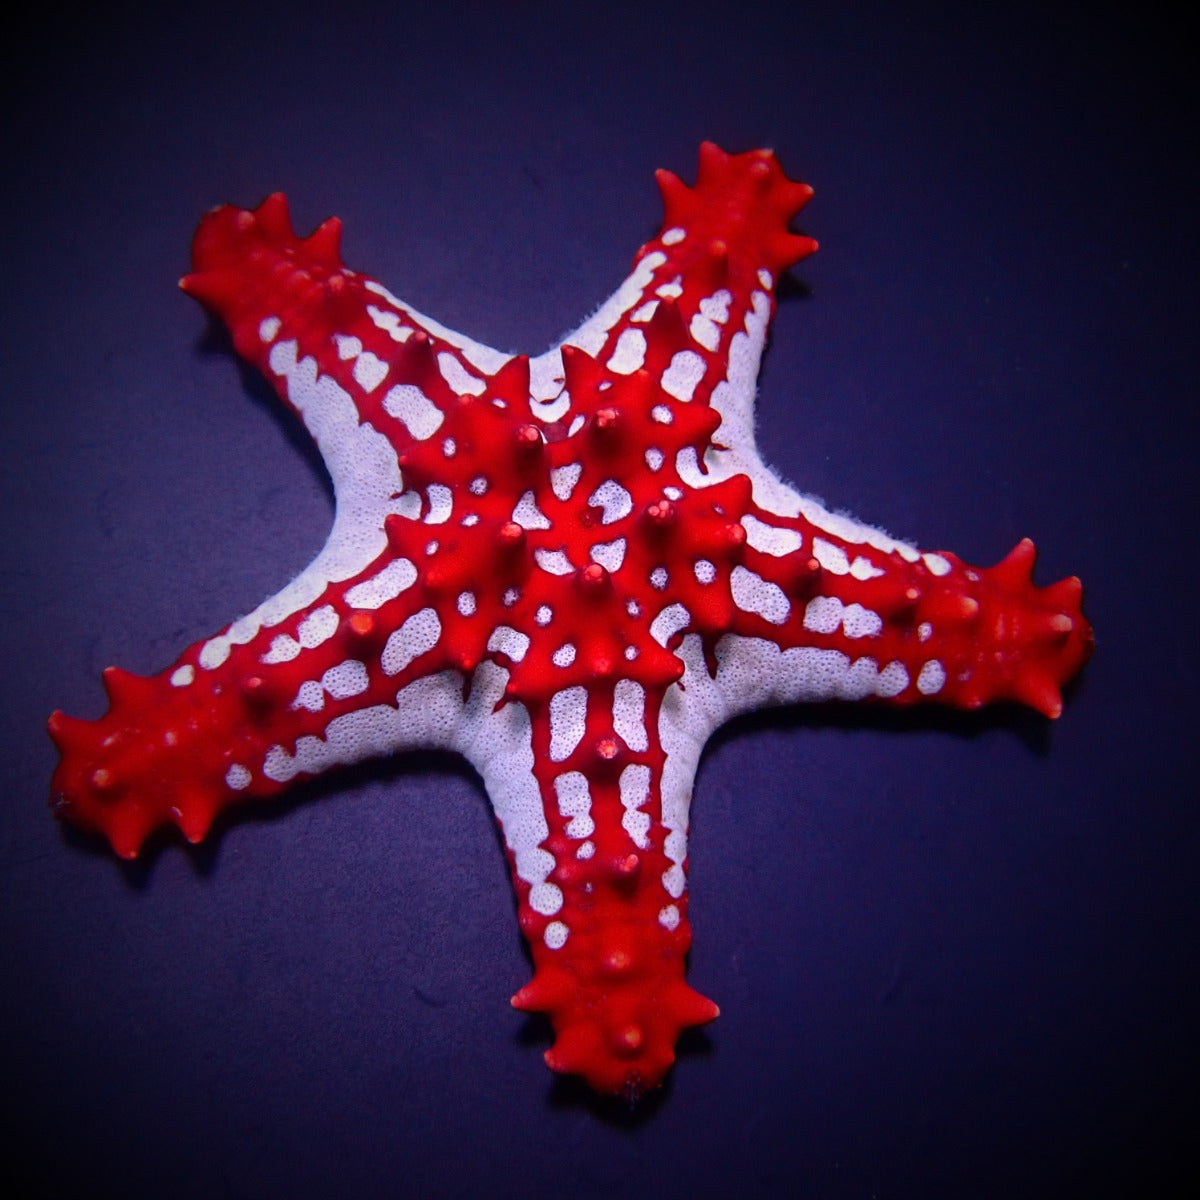 Protoreaster linckii - Red knobbed starfish